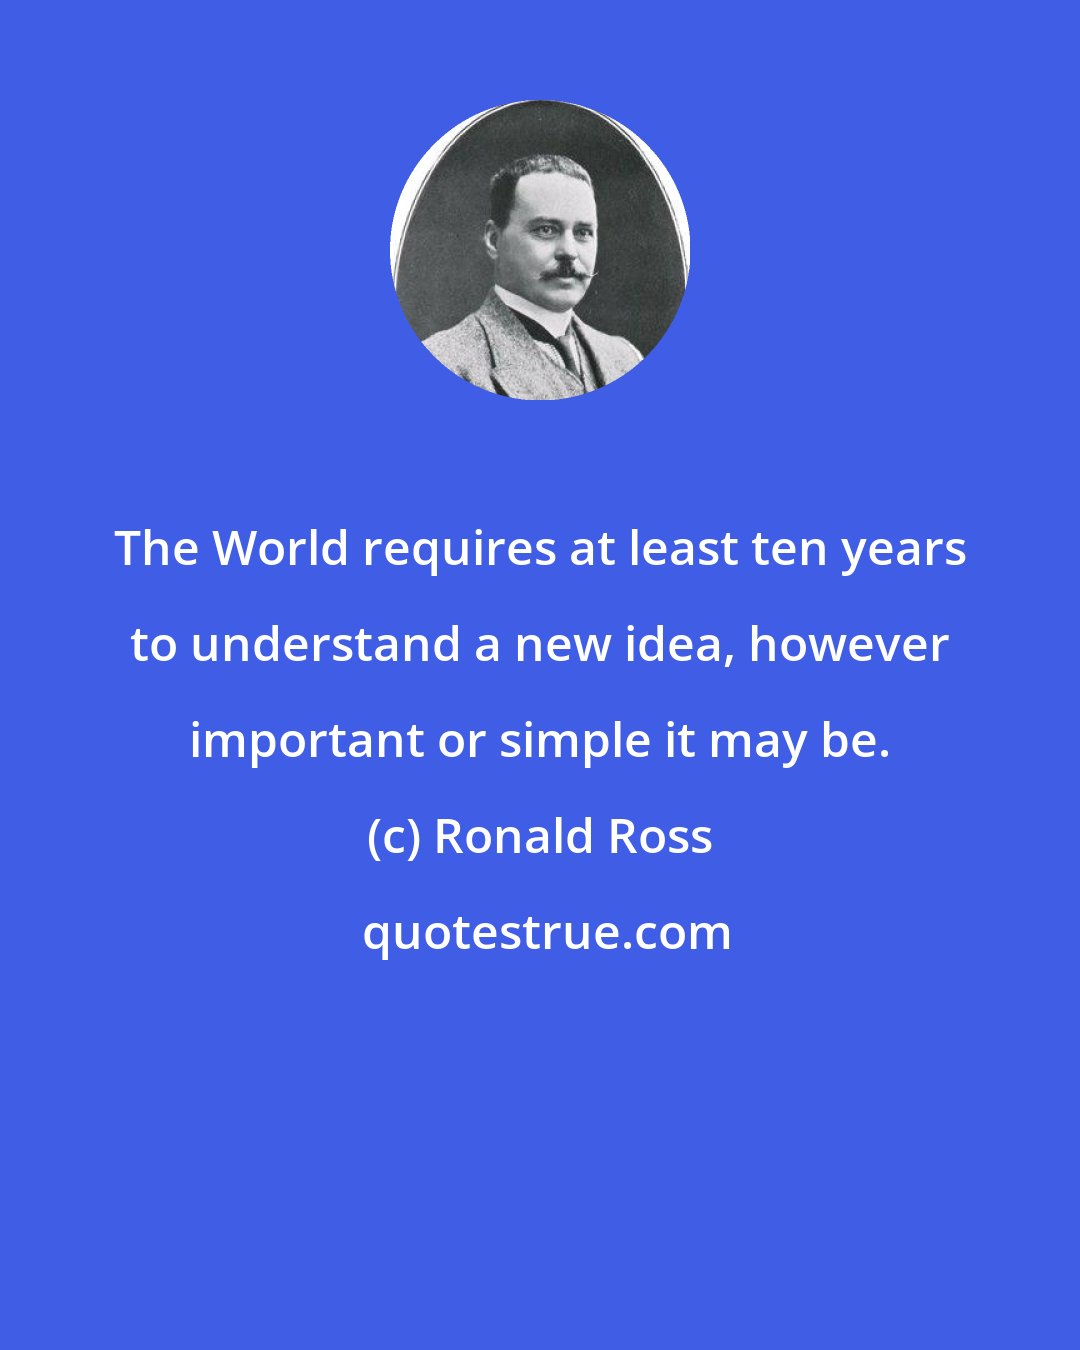 Ronald Ross: The World requires at least ten years to understand a new idea, however important or simple it may be.